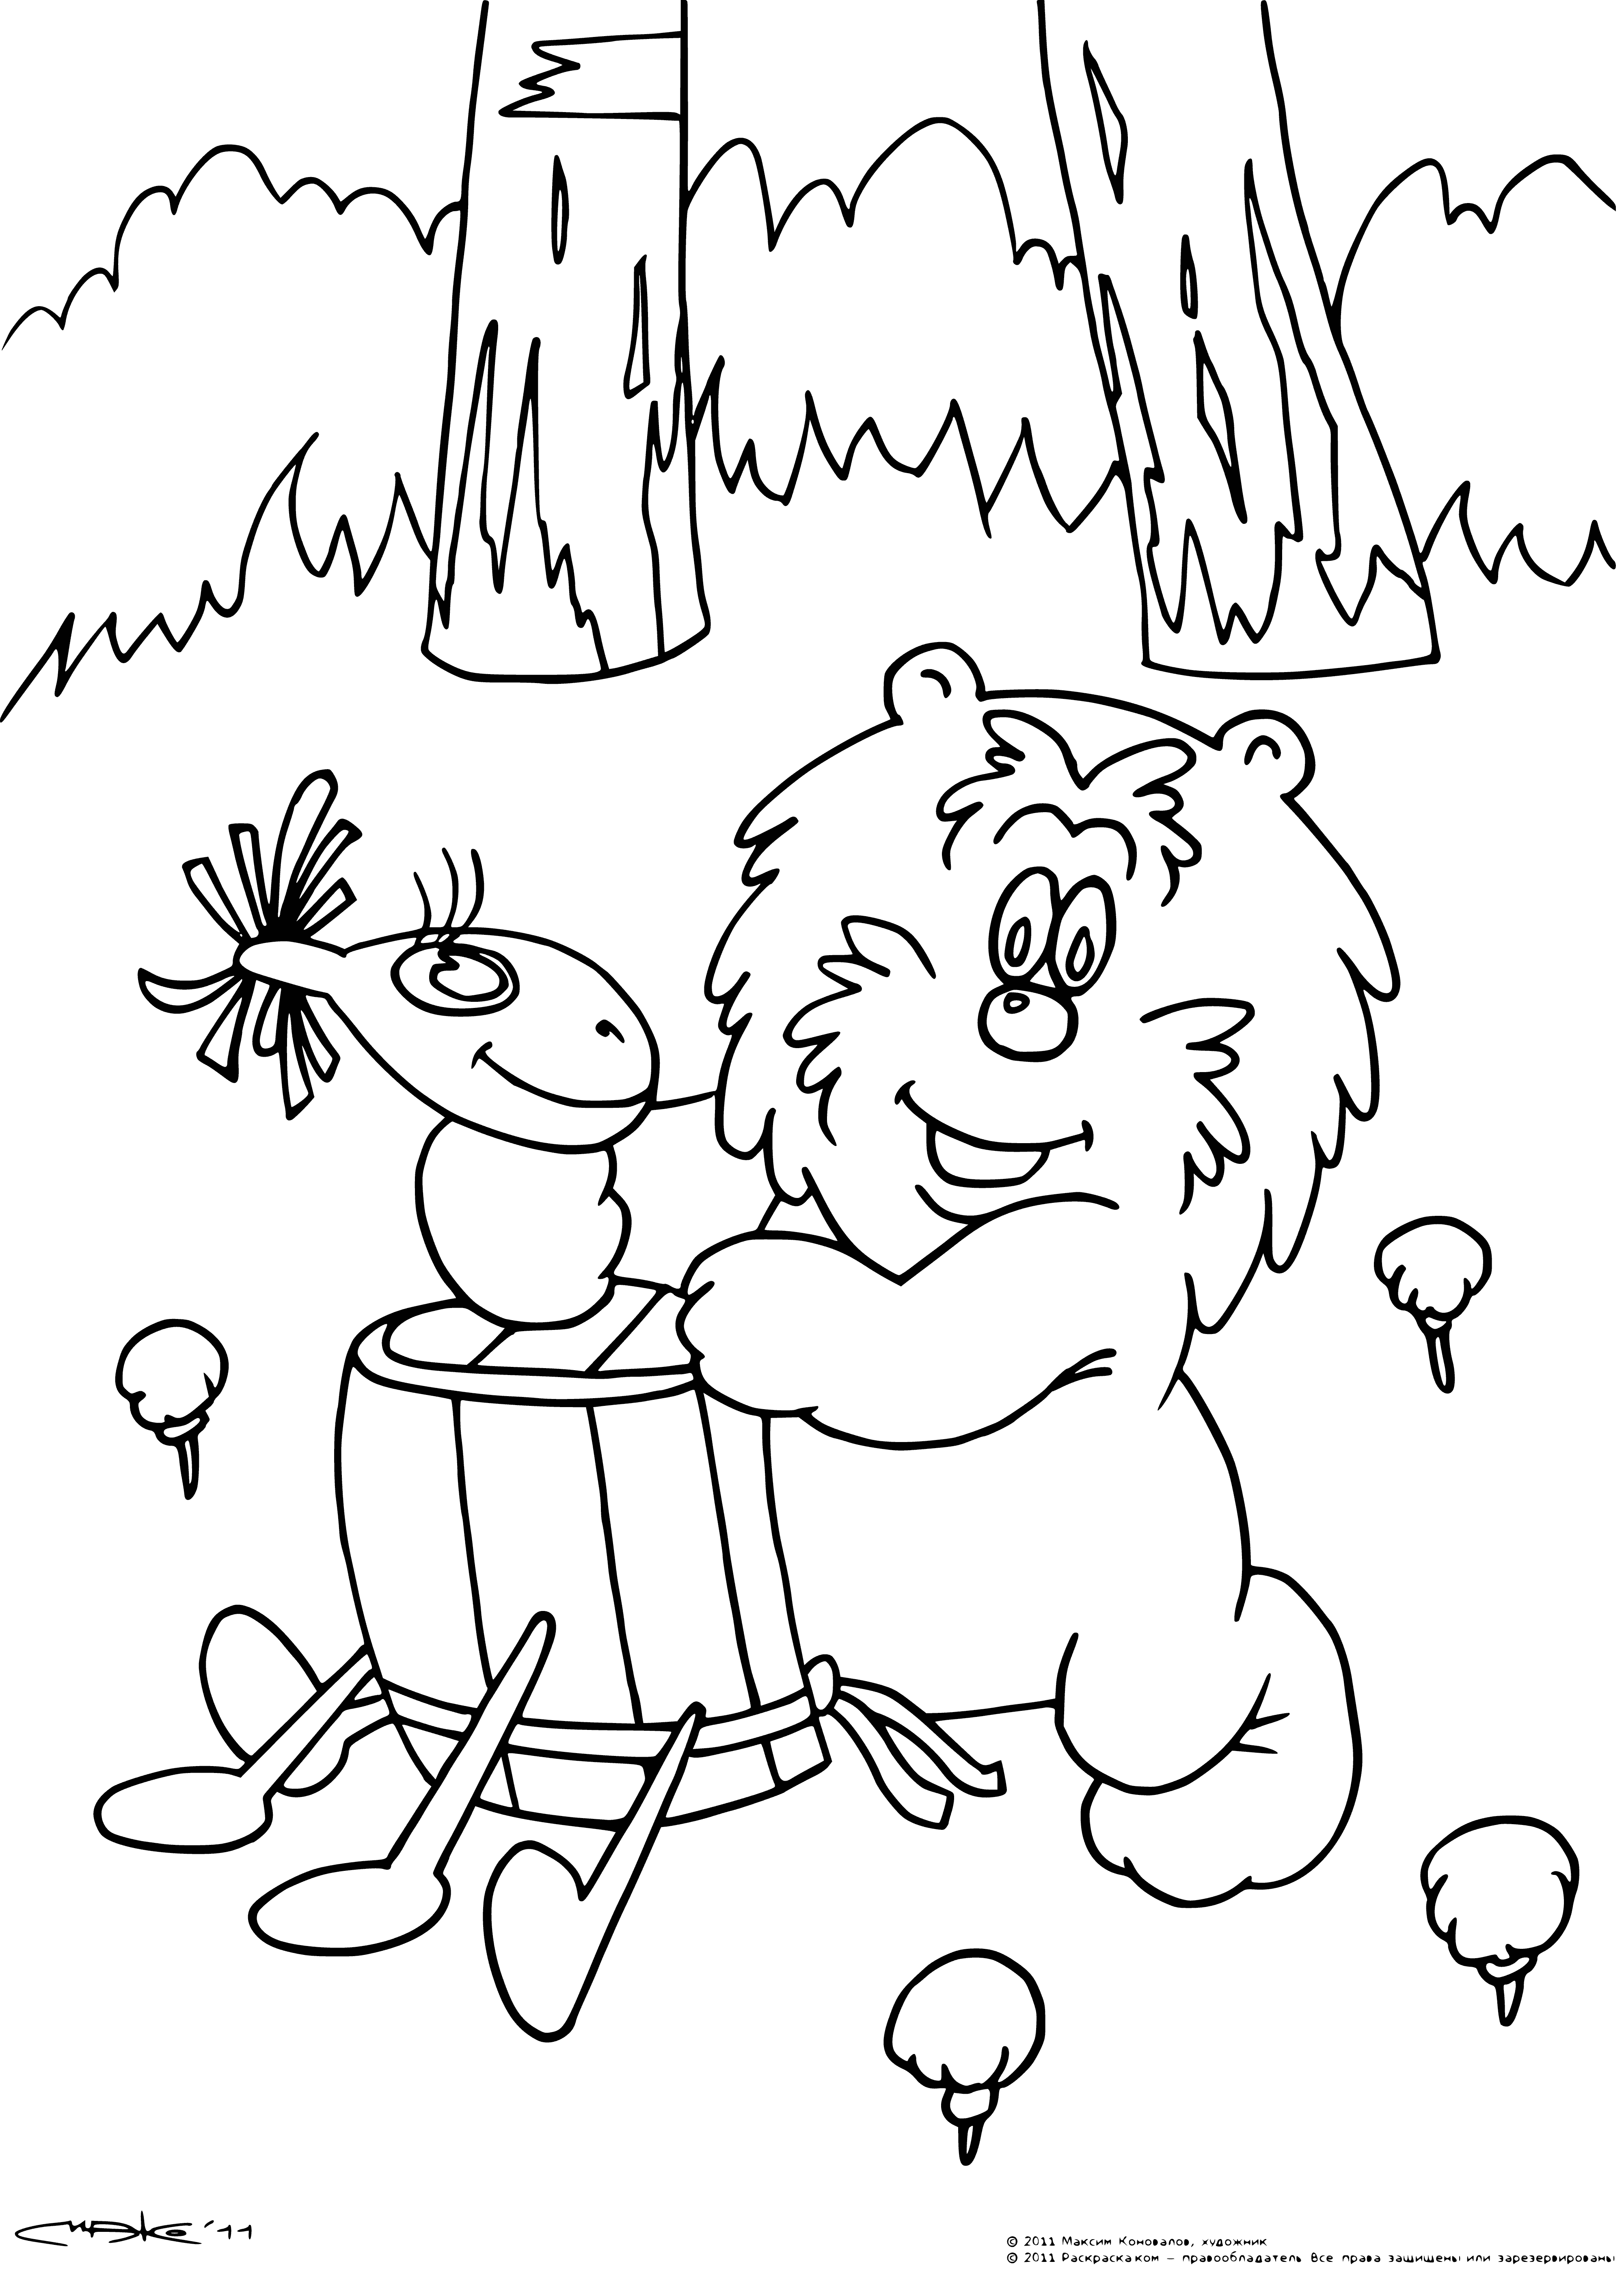 coloring page: The hedgehog & bear are both gazing at the camera from atop a barrel.